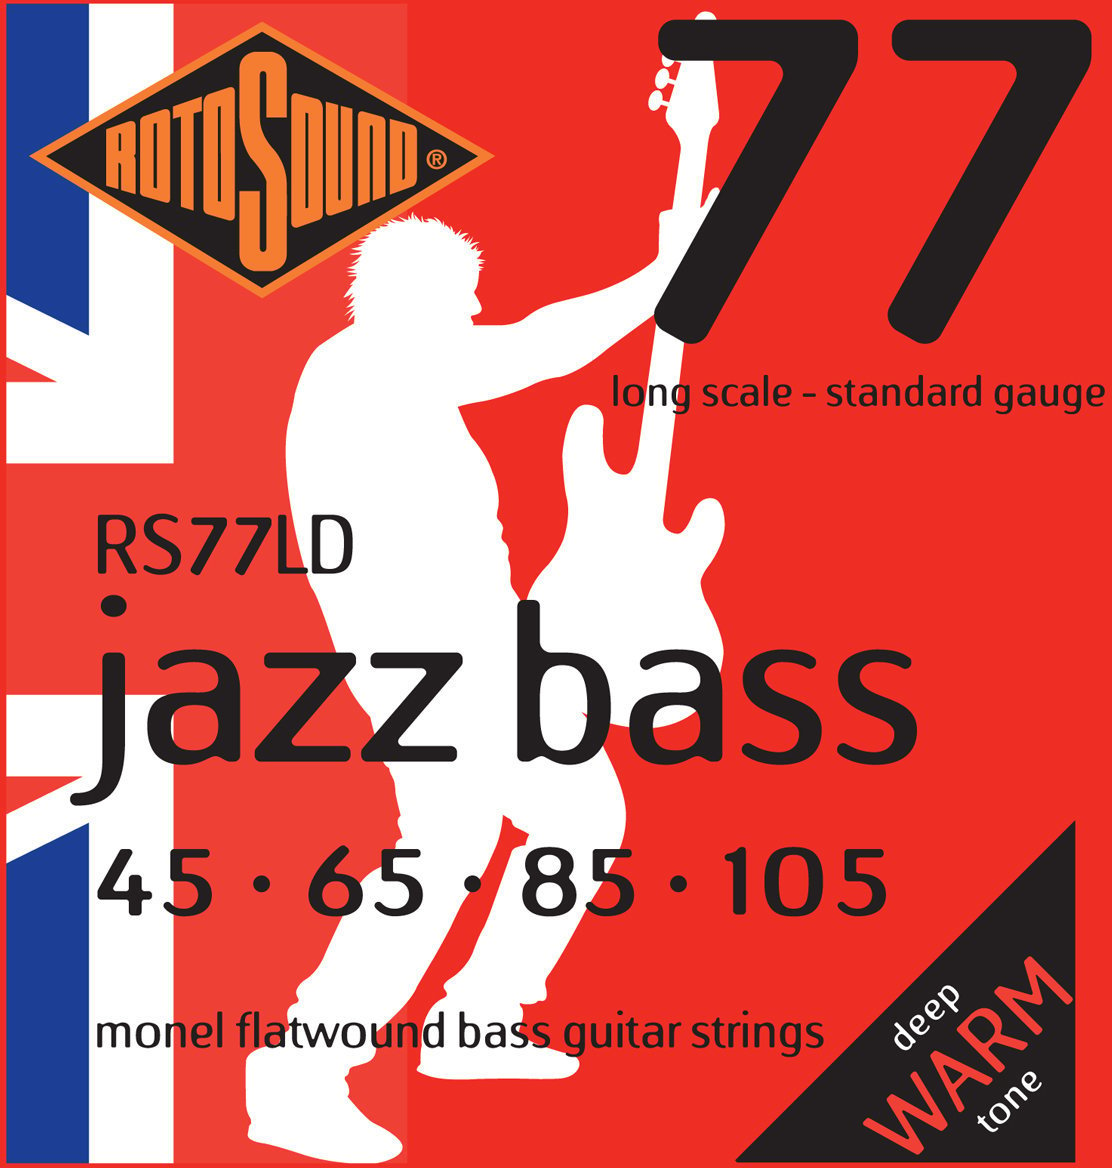 Bass strings Rotosound RS 77 LD